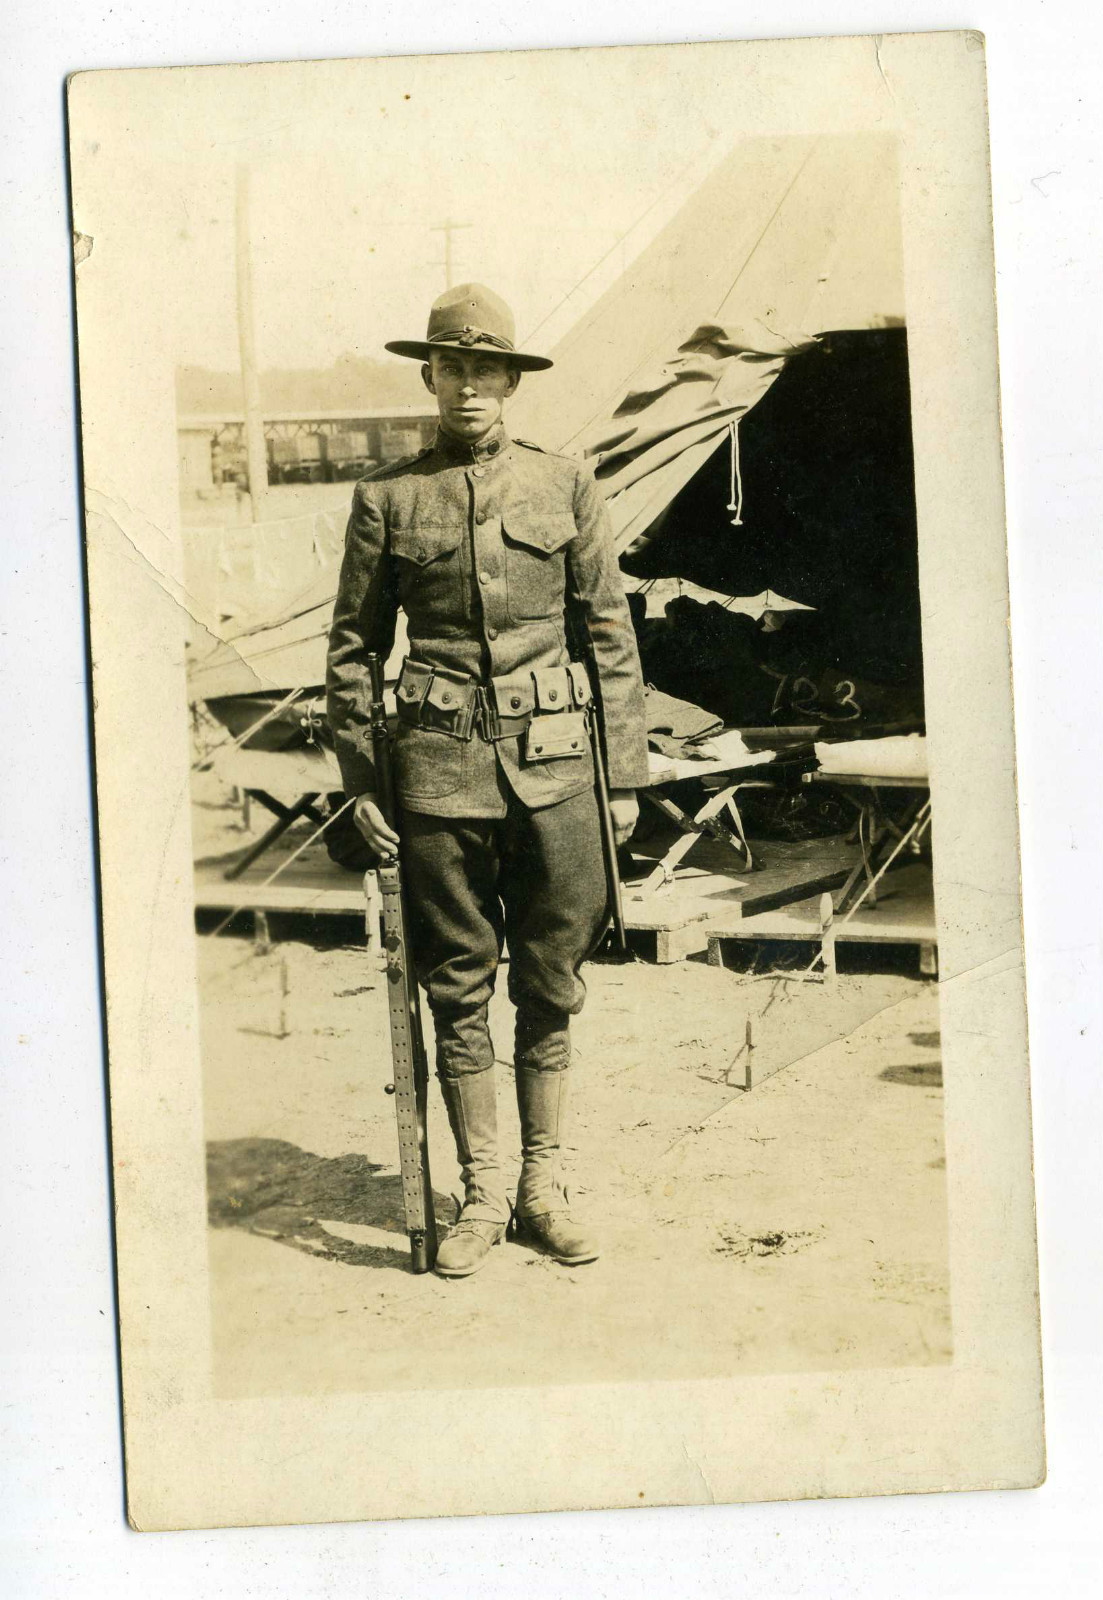 Camp Dix - Soldier with rifle - 1917-20